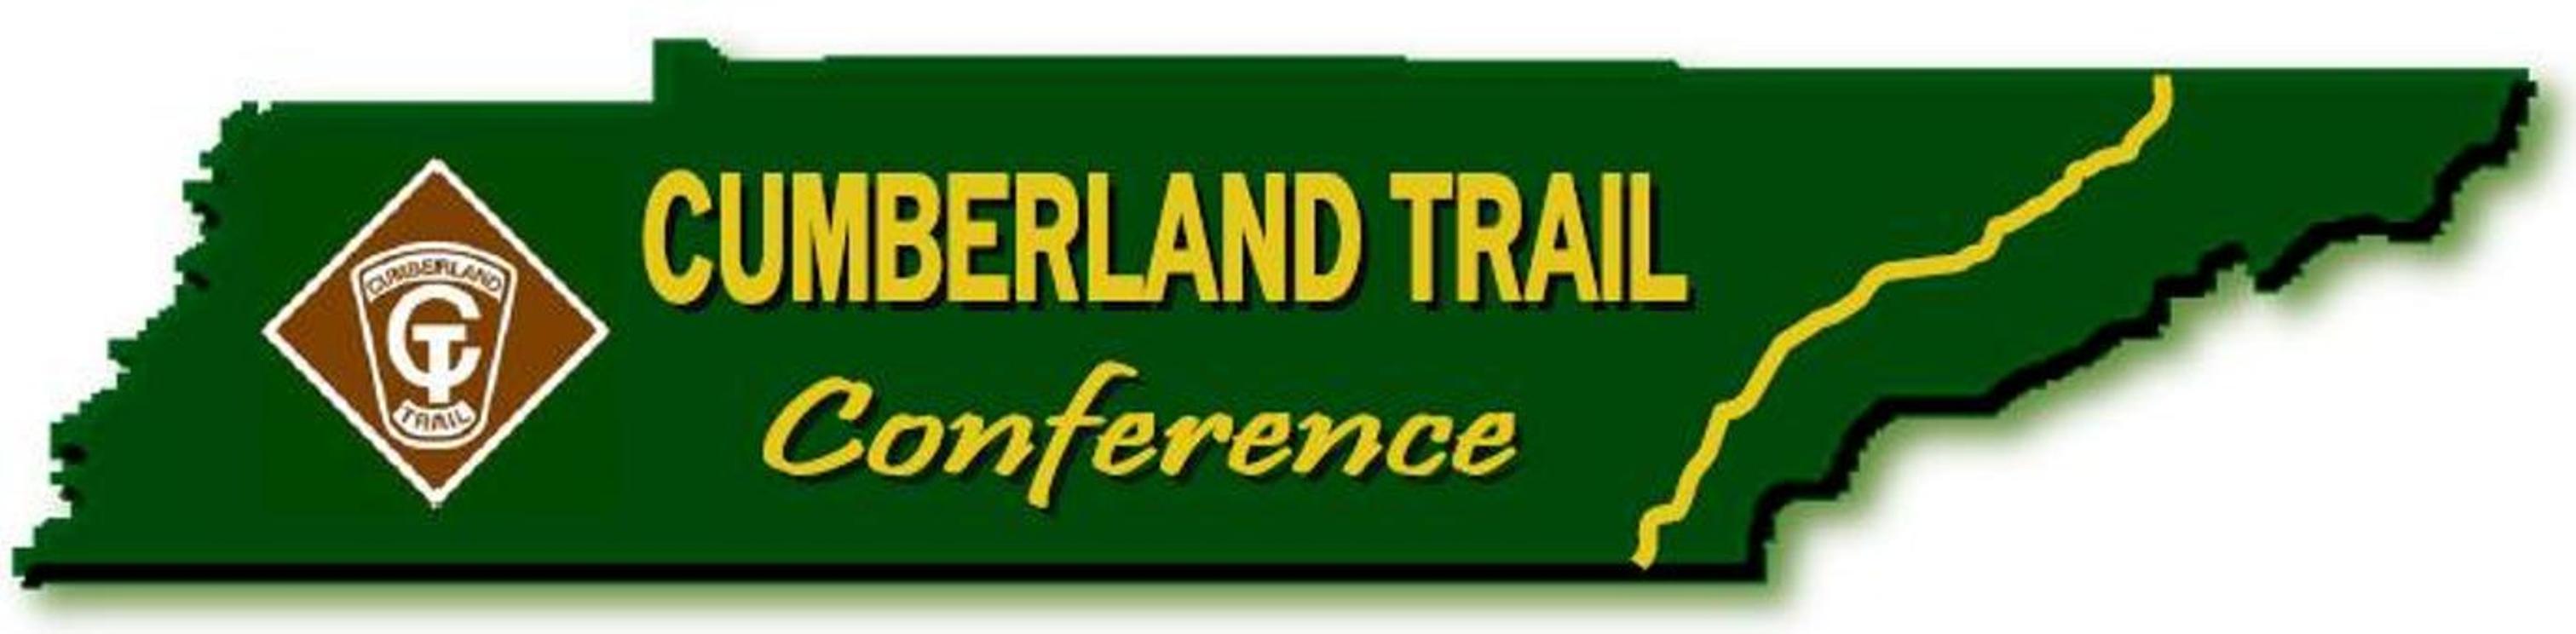 Cumberland Trail Conference - Wild Trails - Hiking, Trail Running Chattanooga, TN